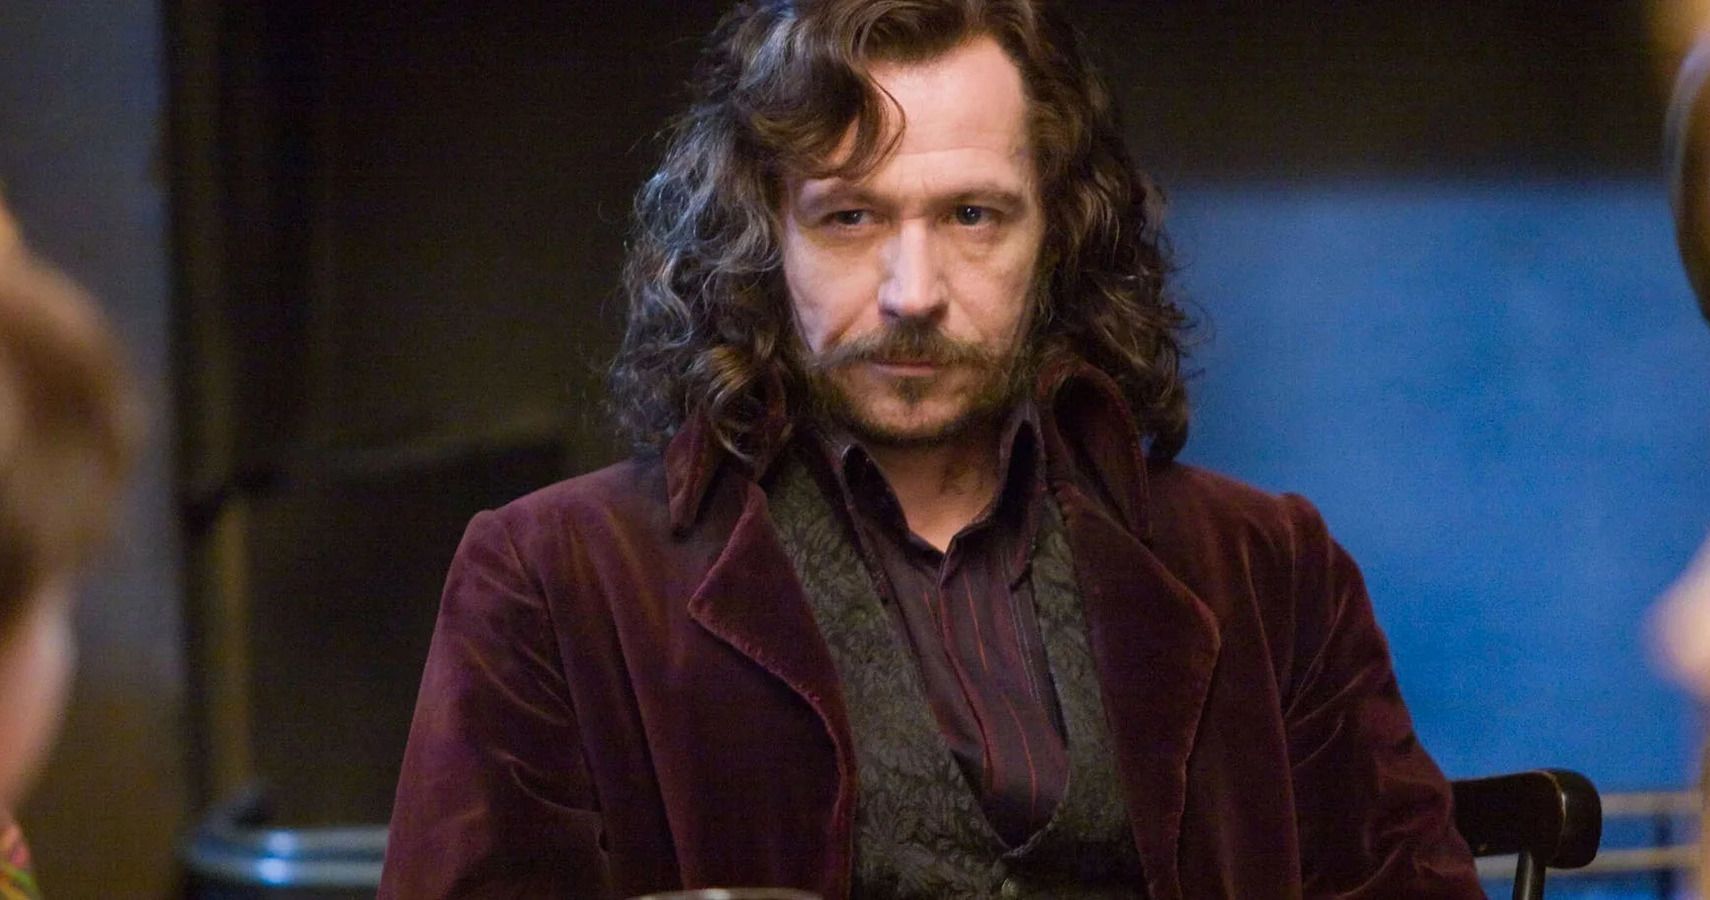 Harry Potter: 10 Of The Wisest & Most Inspiring Sirius Black Quotes